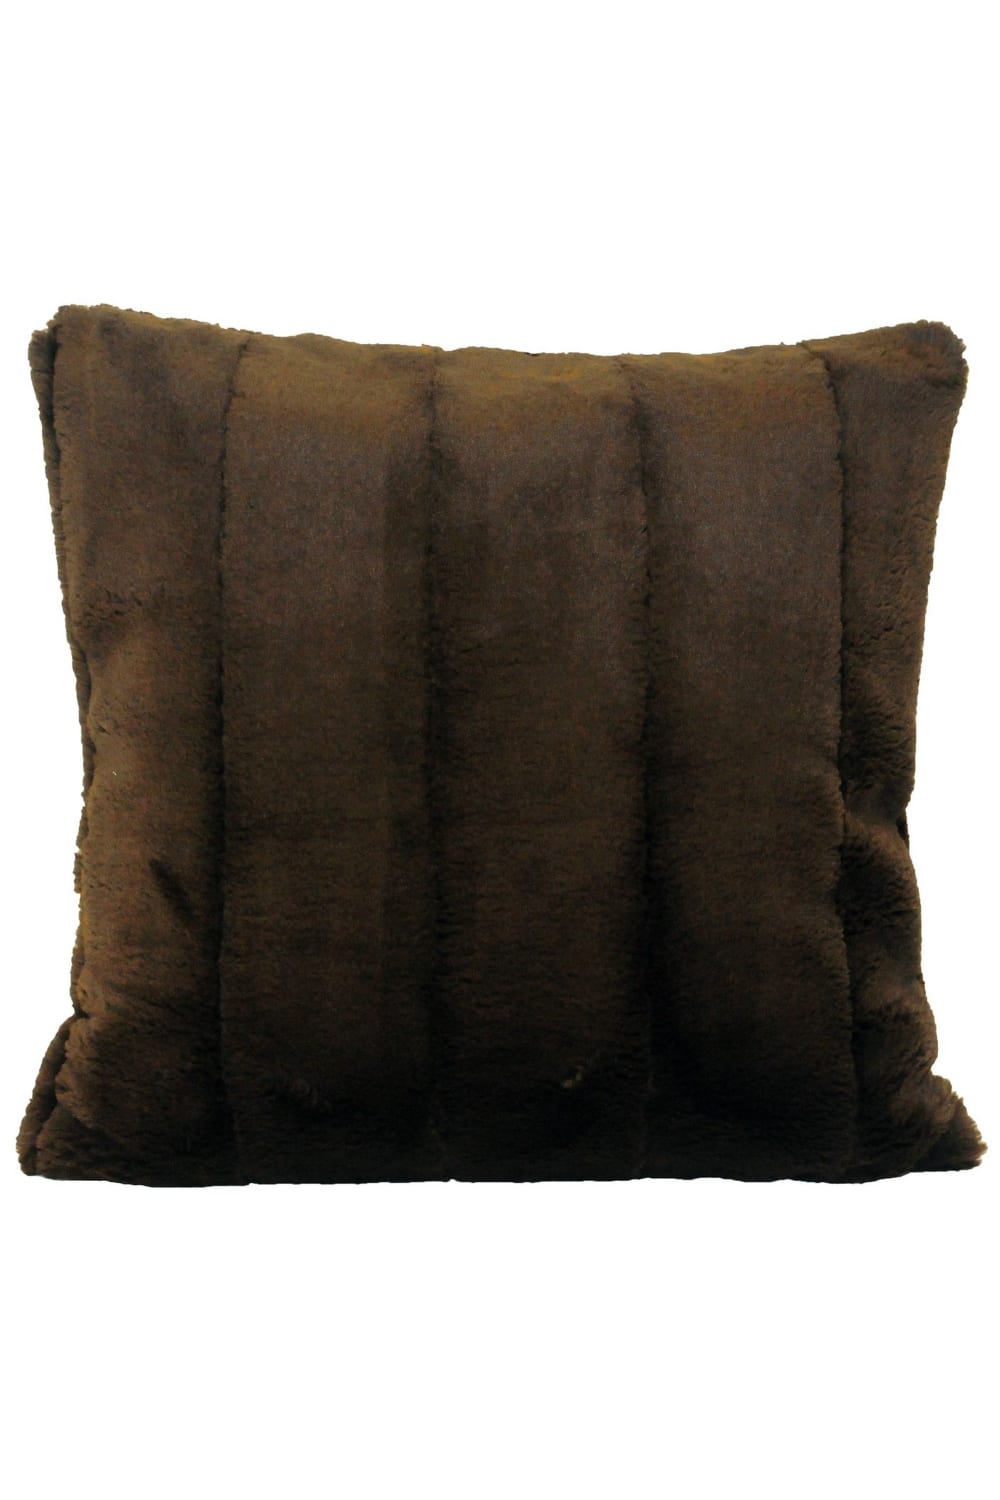 Riva Home Empress Cushion/Pillow Cover (Chocolate) (17.7 x 17.7in)